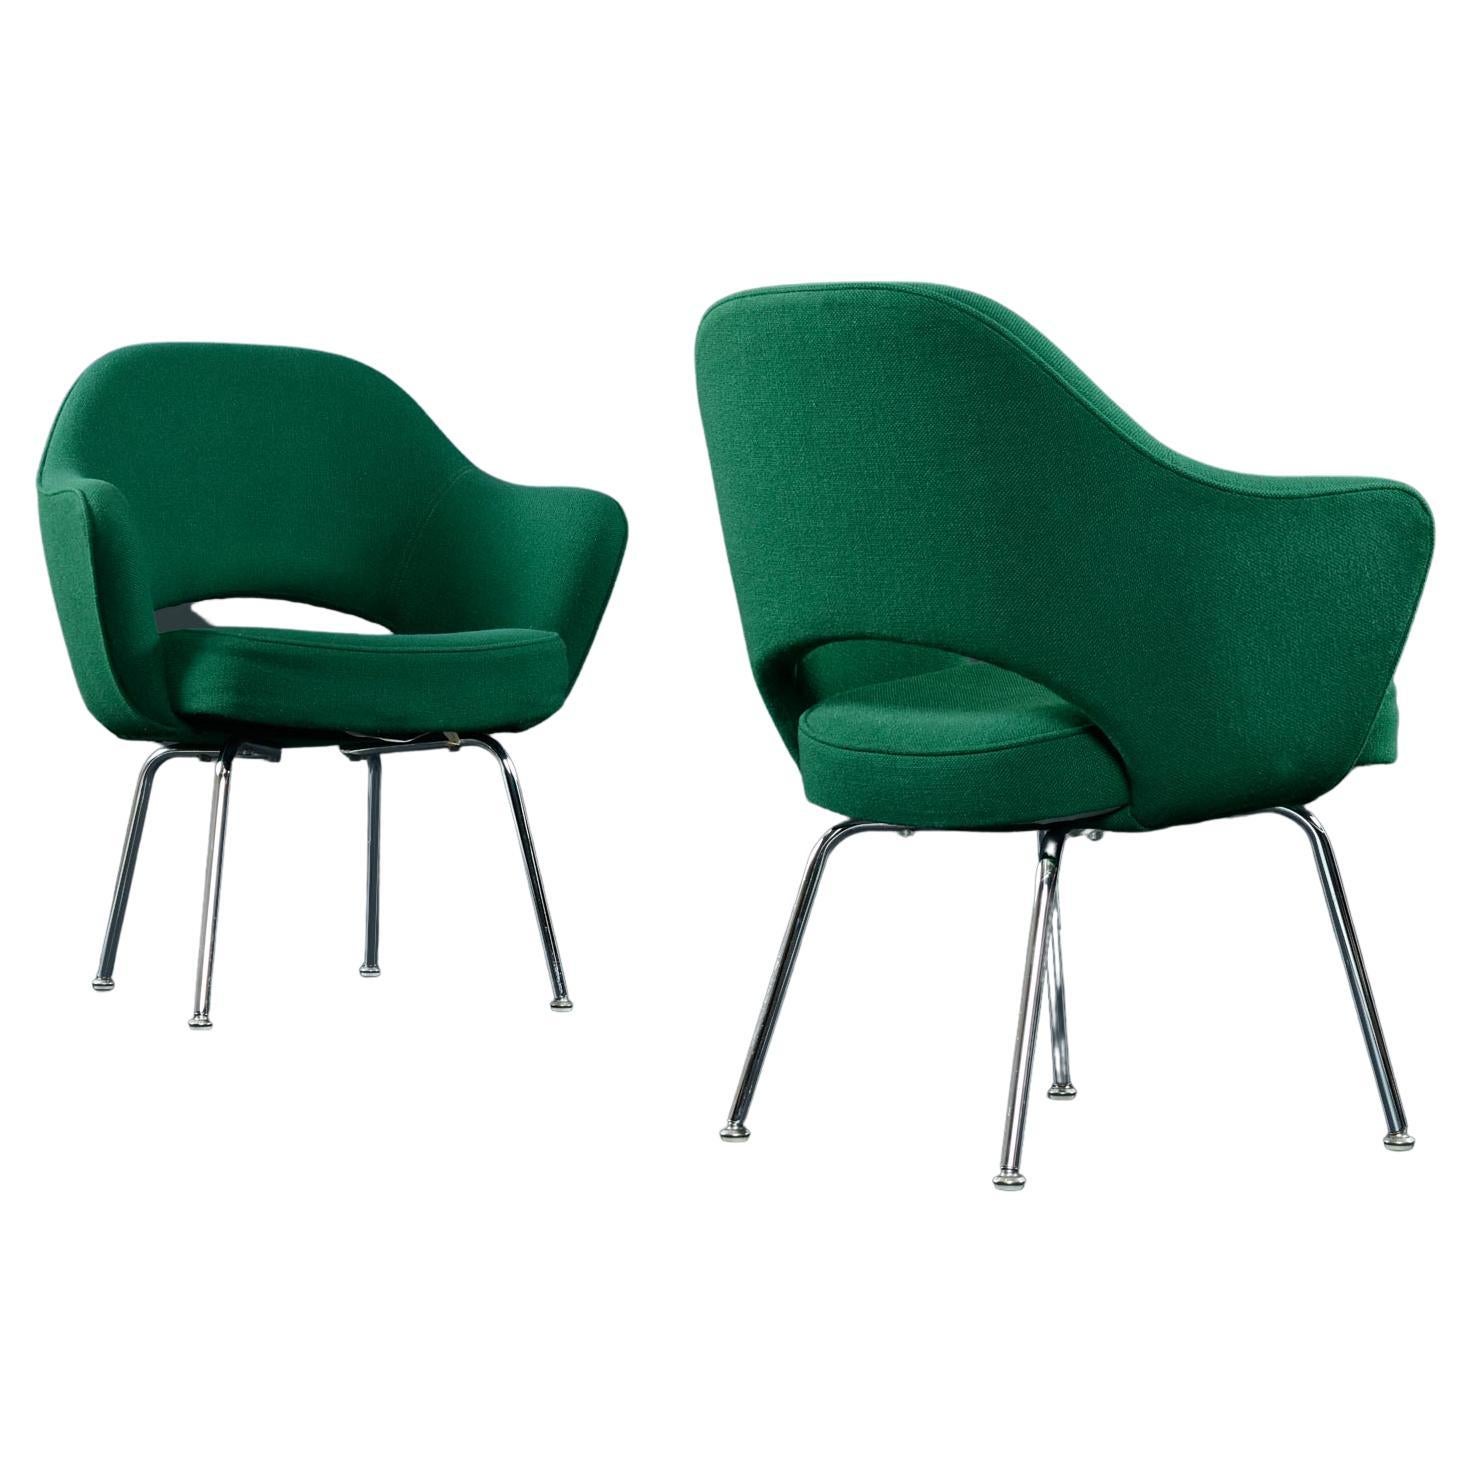 Price shown is for two chairs. Six chairs (3 pairs) available, inquire if you would like more than two chairs.

Eero Saarinen for Knoll Executive chairs in original emerald green fabric. It’s truly incredible to find a set of vintage upholstered